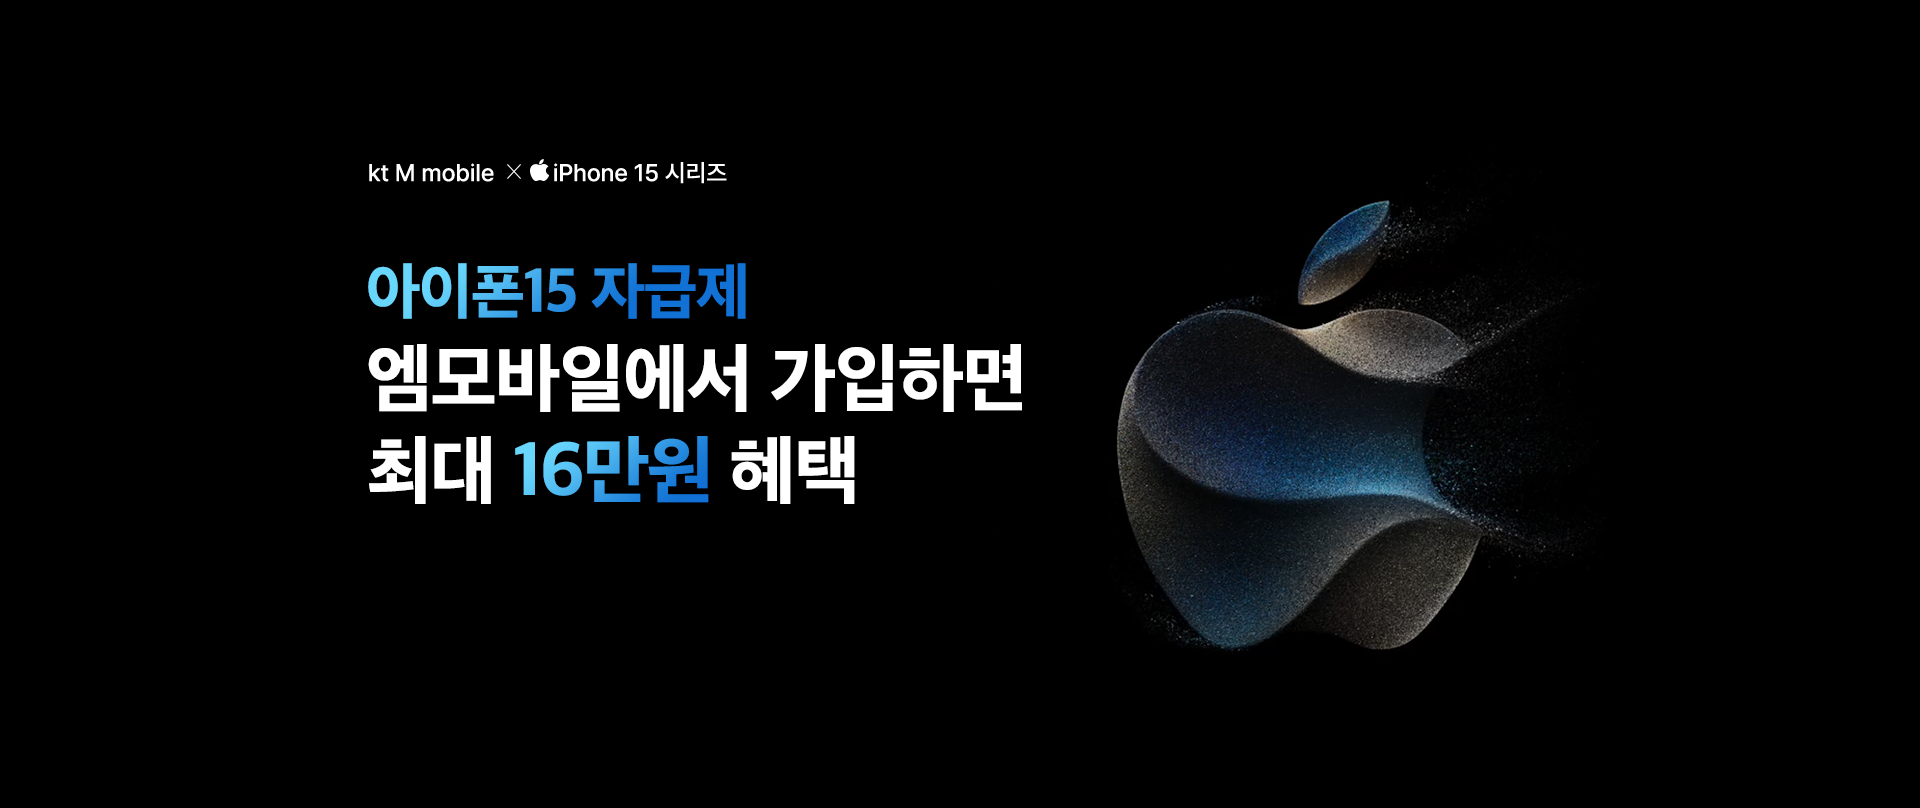 kt M mobile X iPhone 15 시리즈